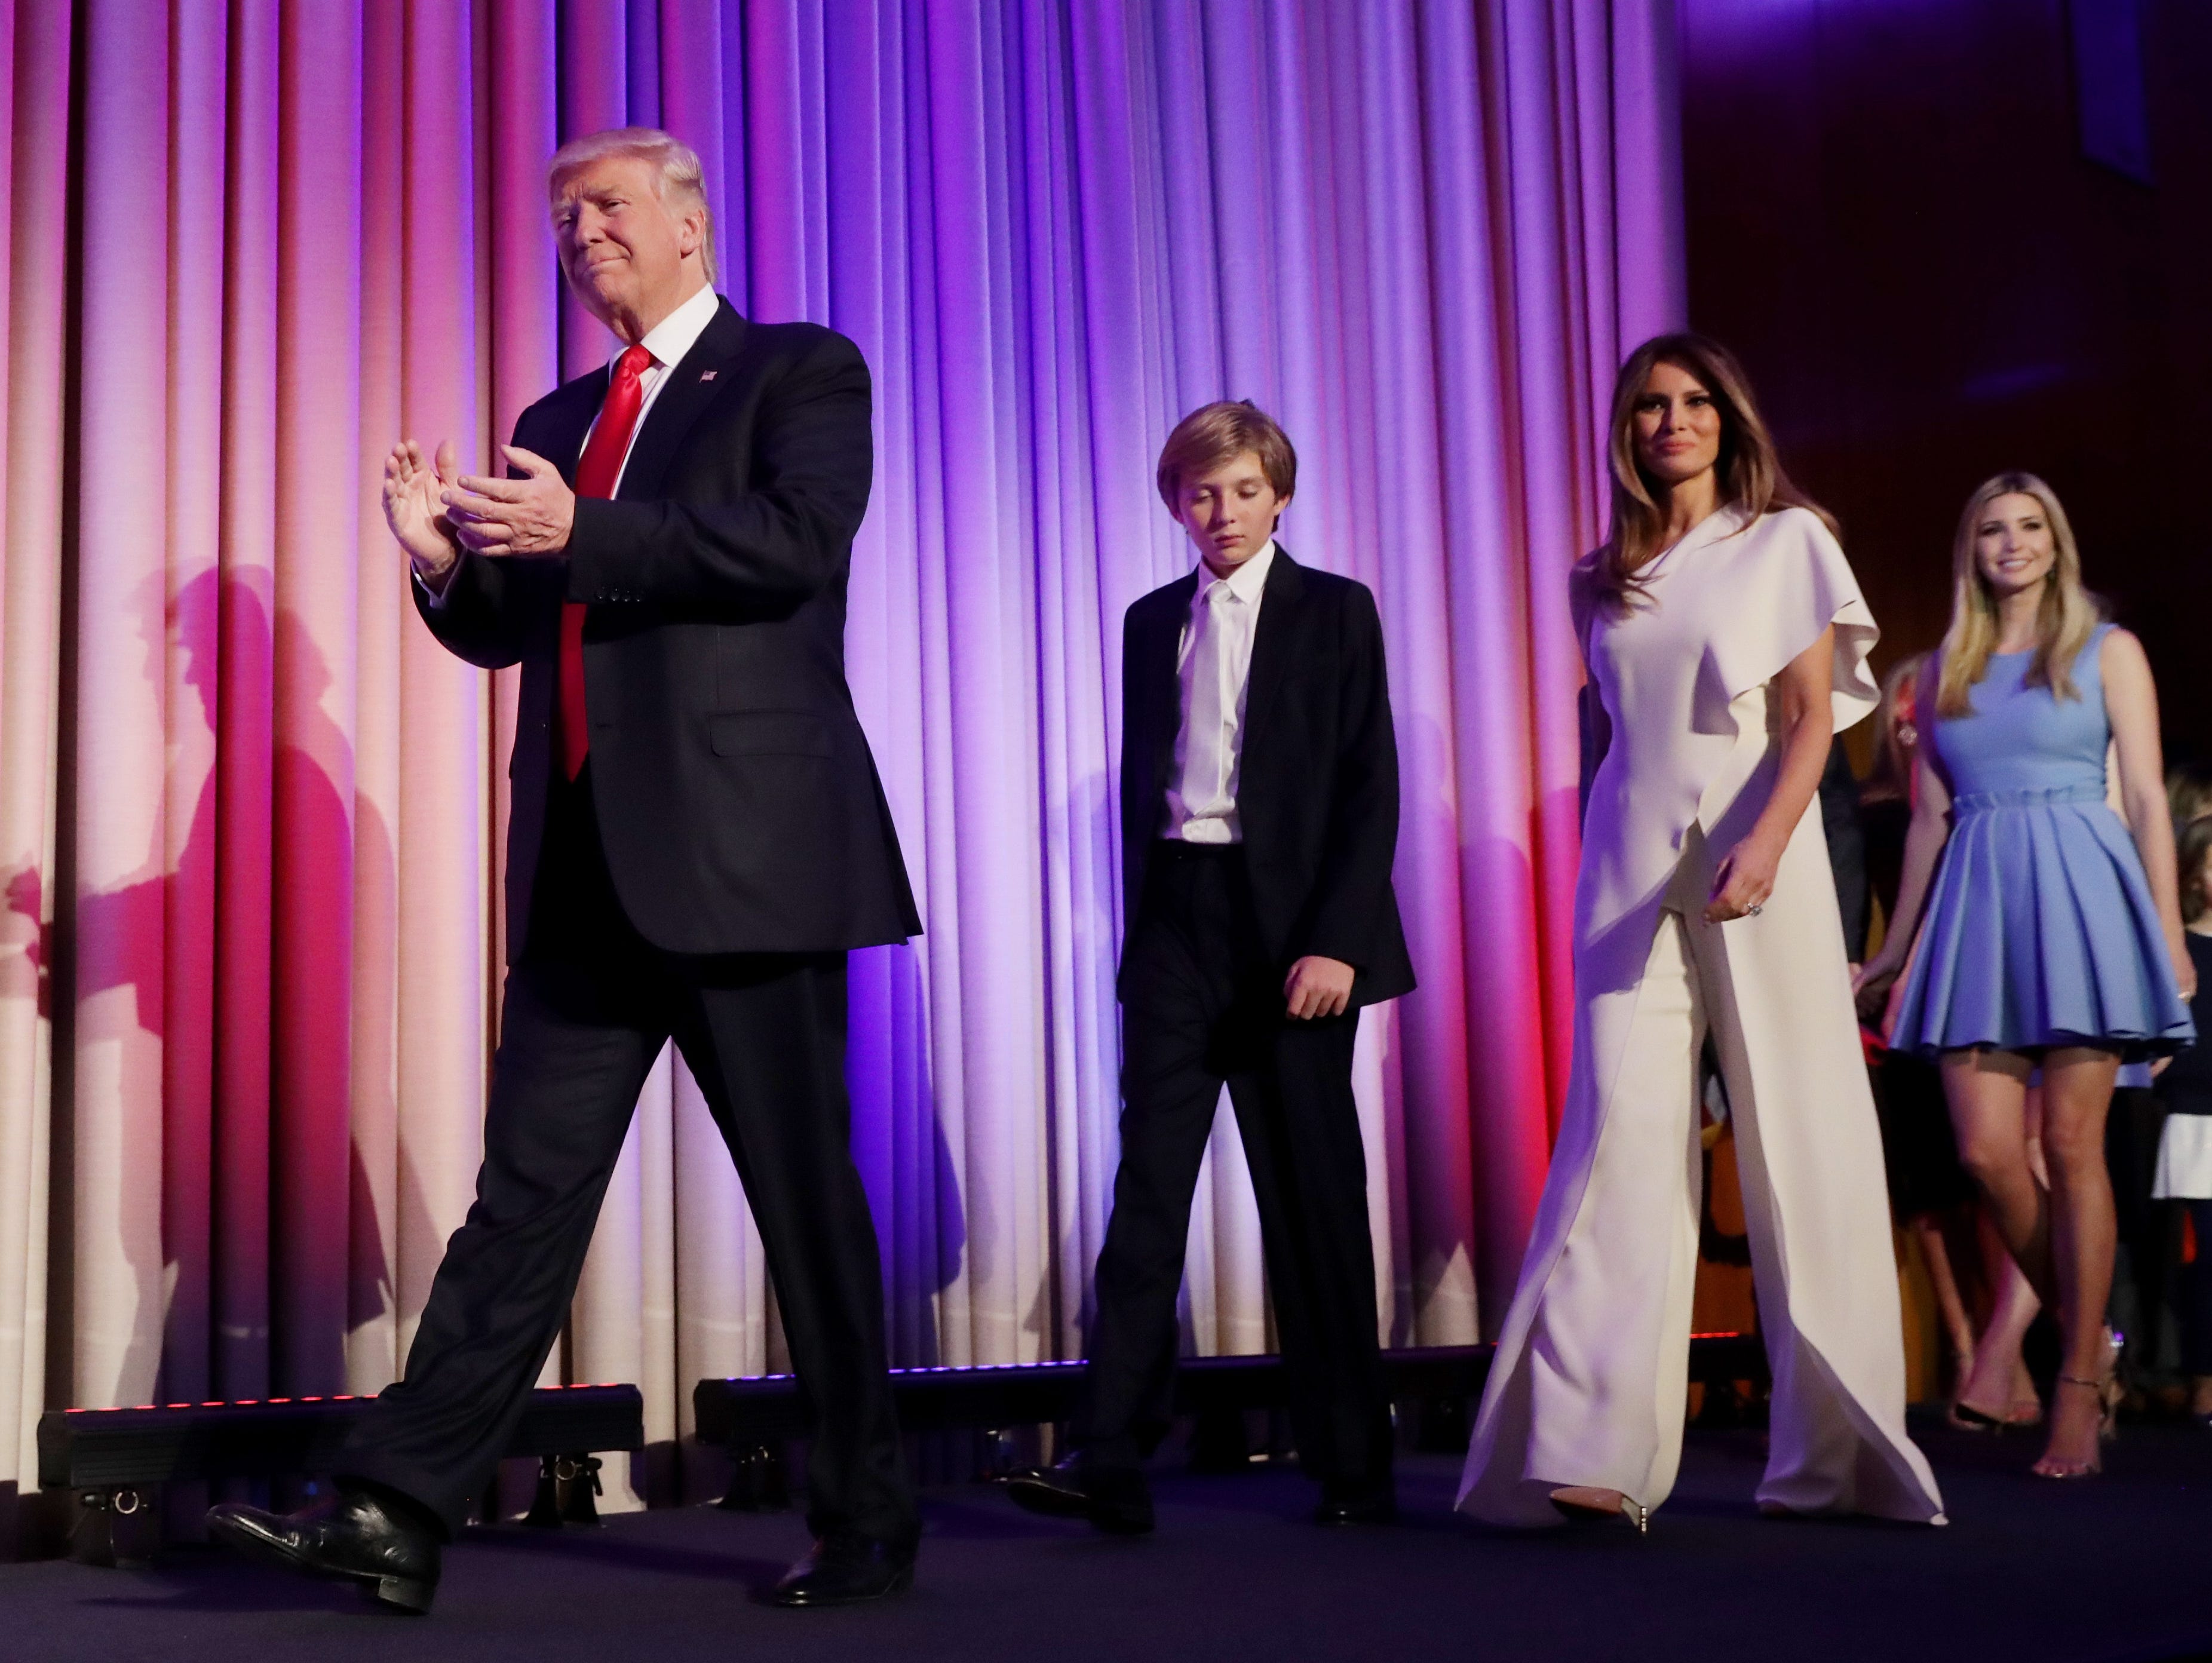 Republican president-elect Donald Trump walks on stage with his son Barron, wife Melania and daughter Ivanka on Nov. 9, 2016, in New York City.